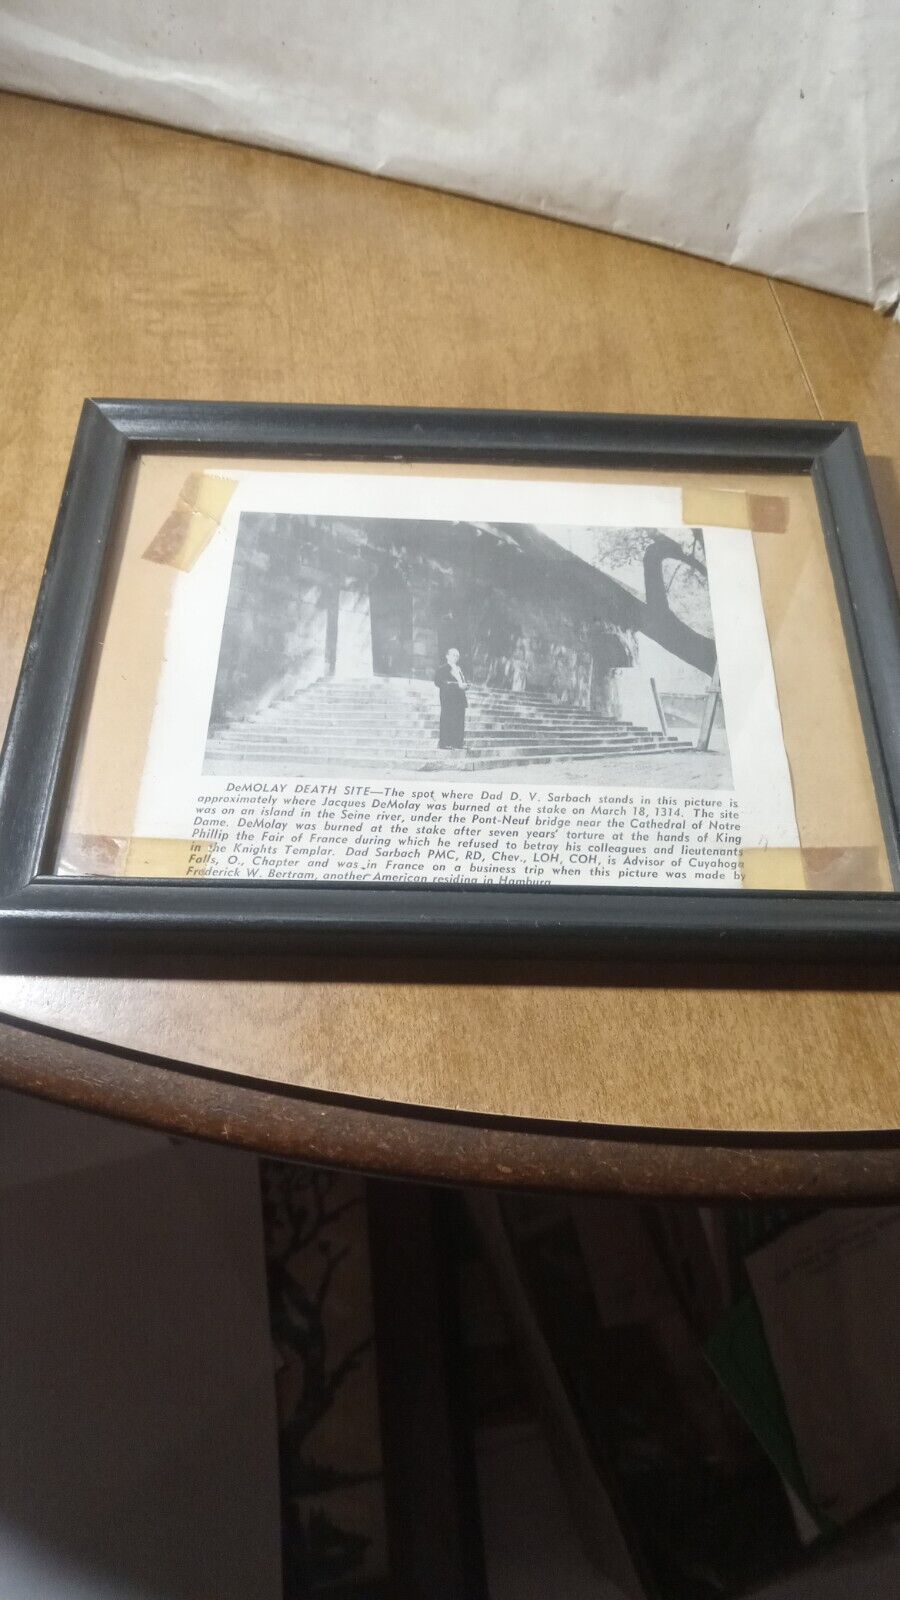 Masonic DeMolay History Of DeMolay Death Site Photo In Frame Vintage Rare